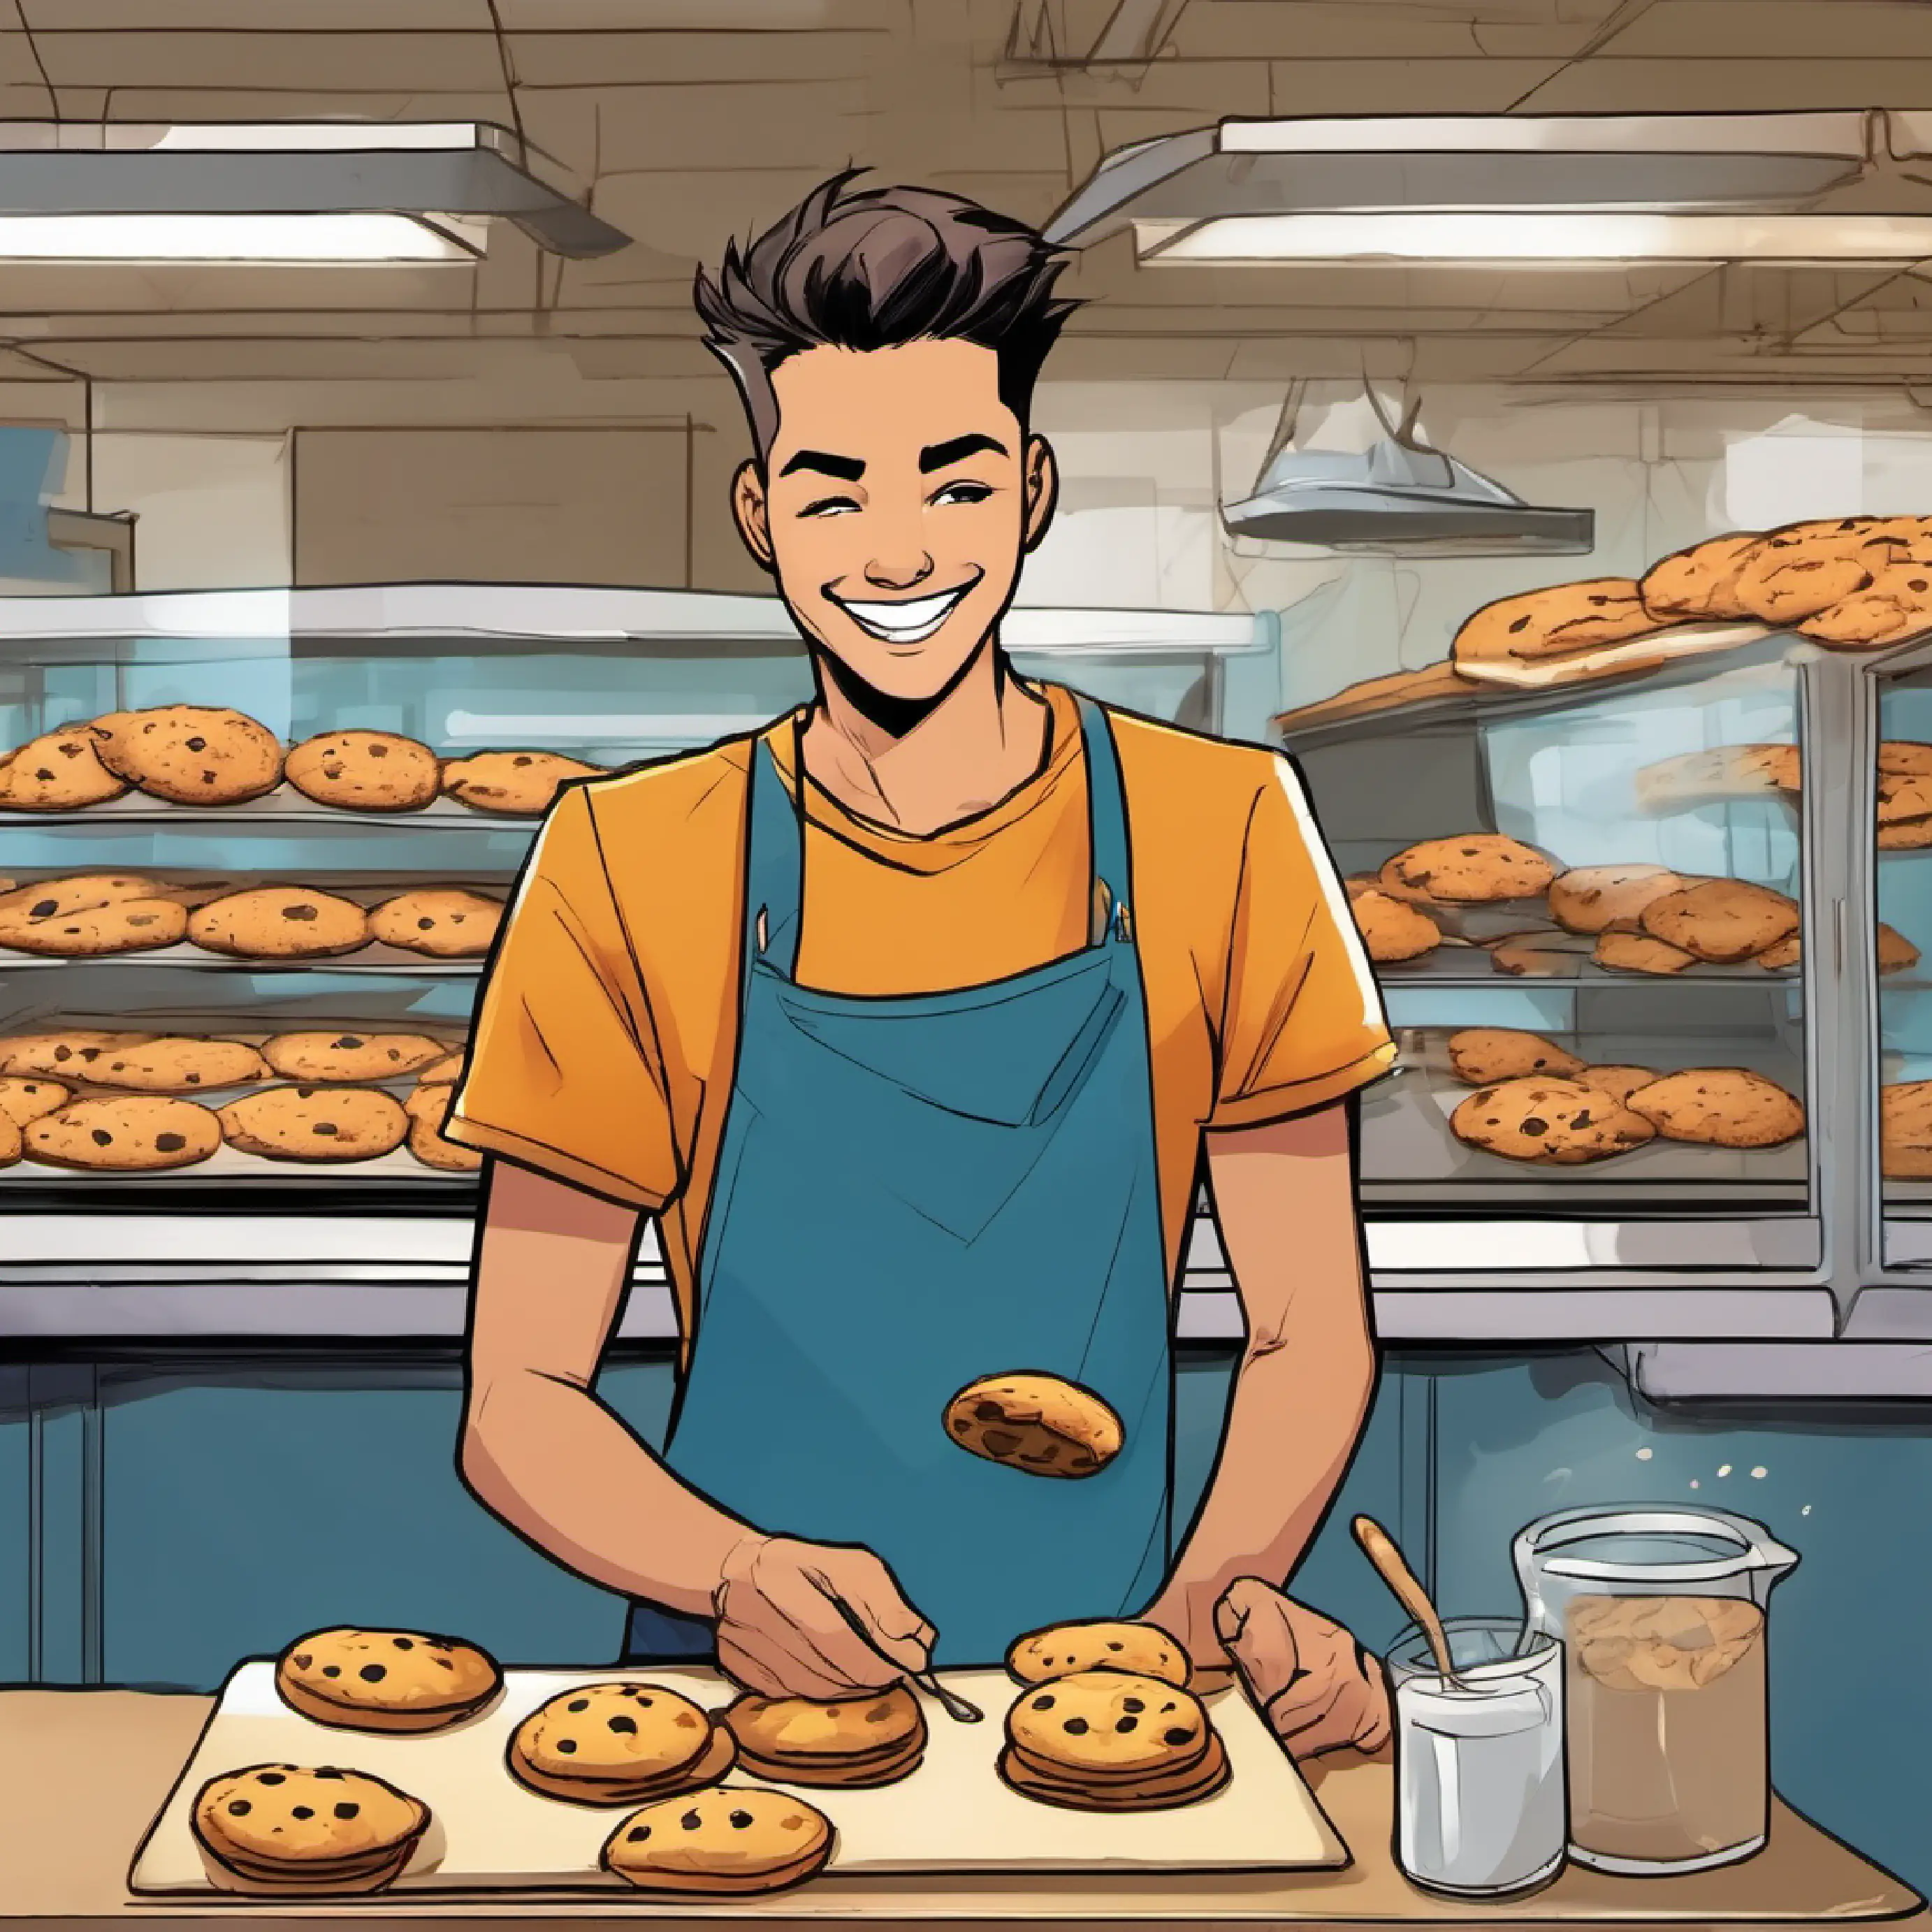 Kevin bakes new cookies at the bakery.